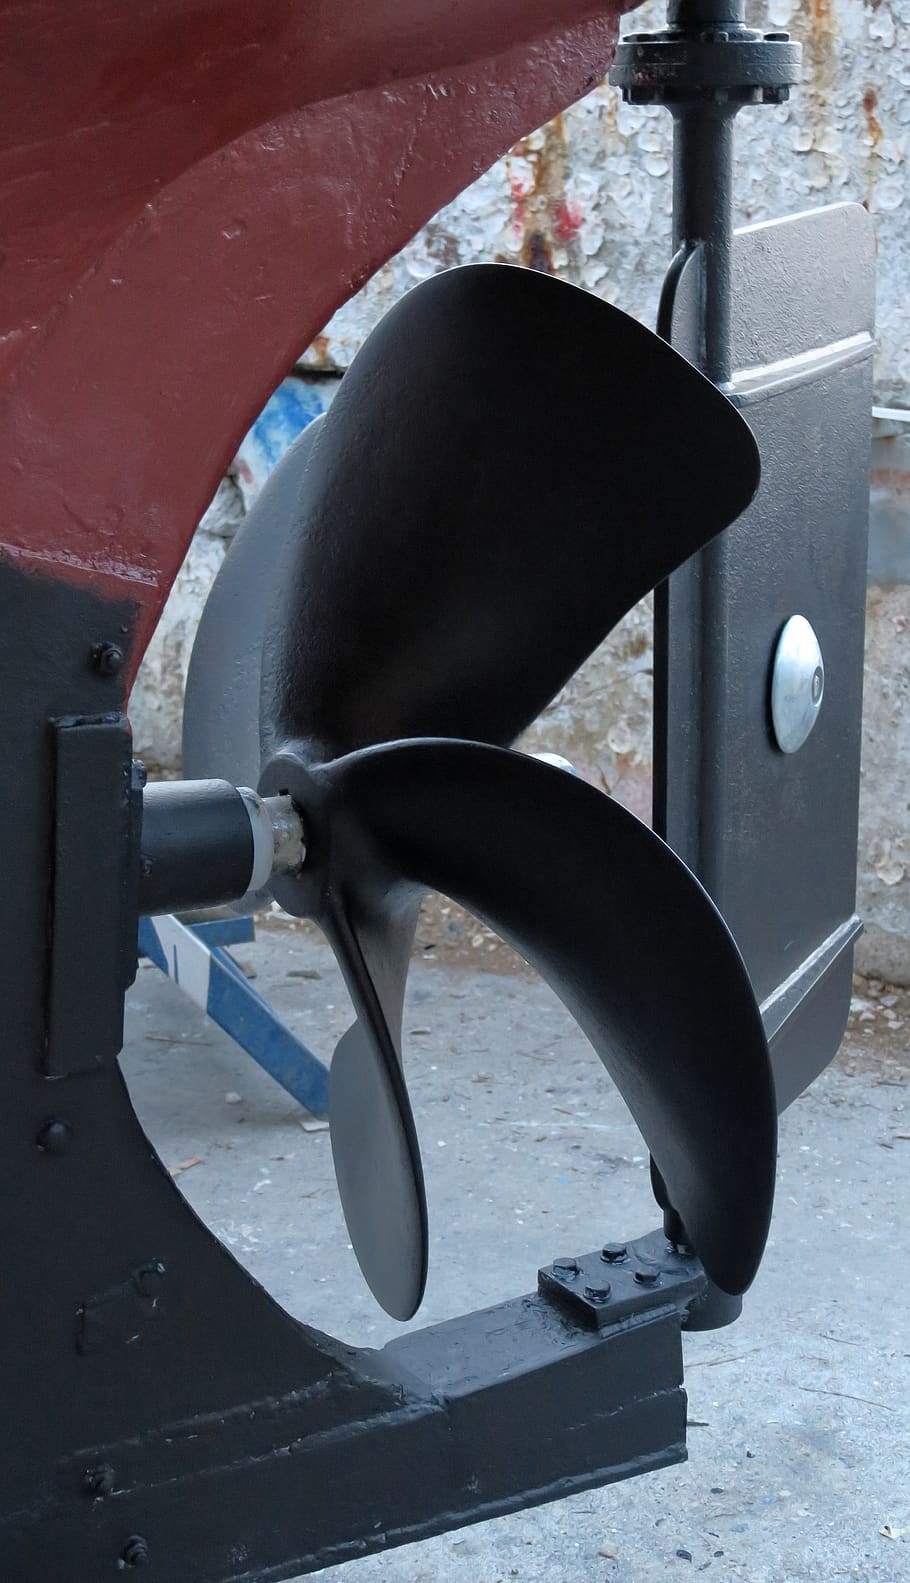 propeller, black, helm, boat, metal, day, close-up, land vehicle, outdoors, machinery